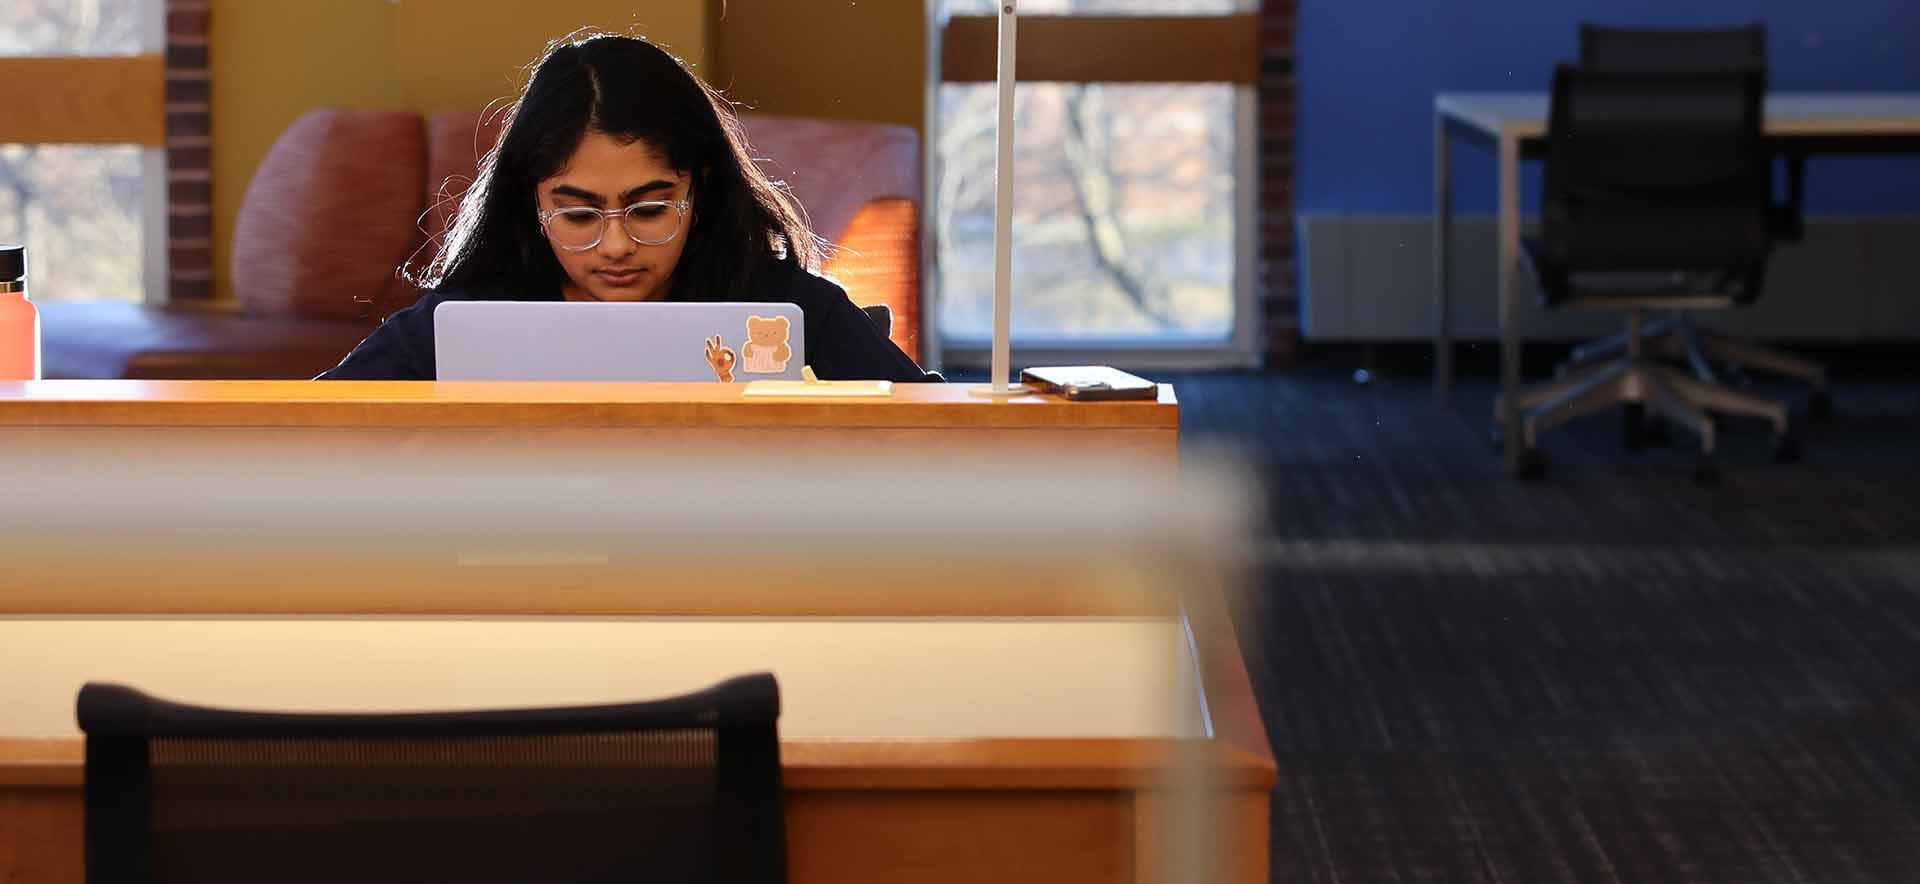 Brandeis students at a desk with computer